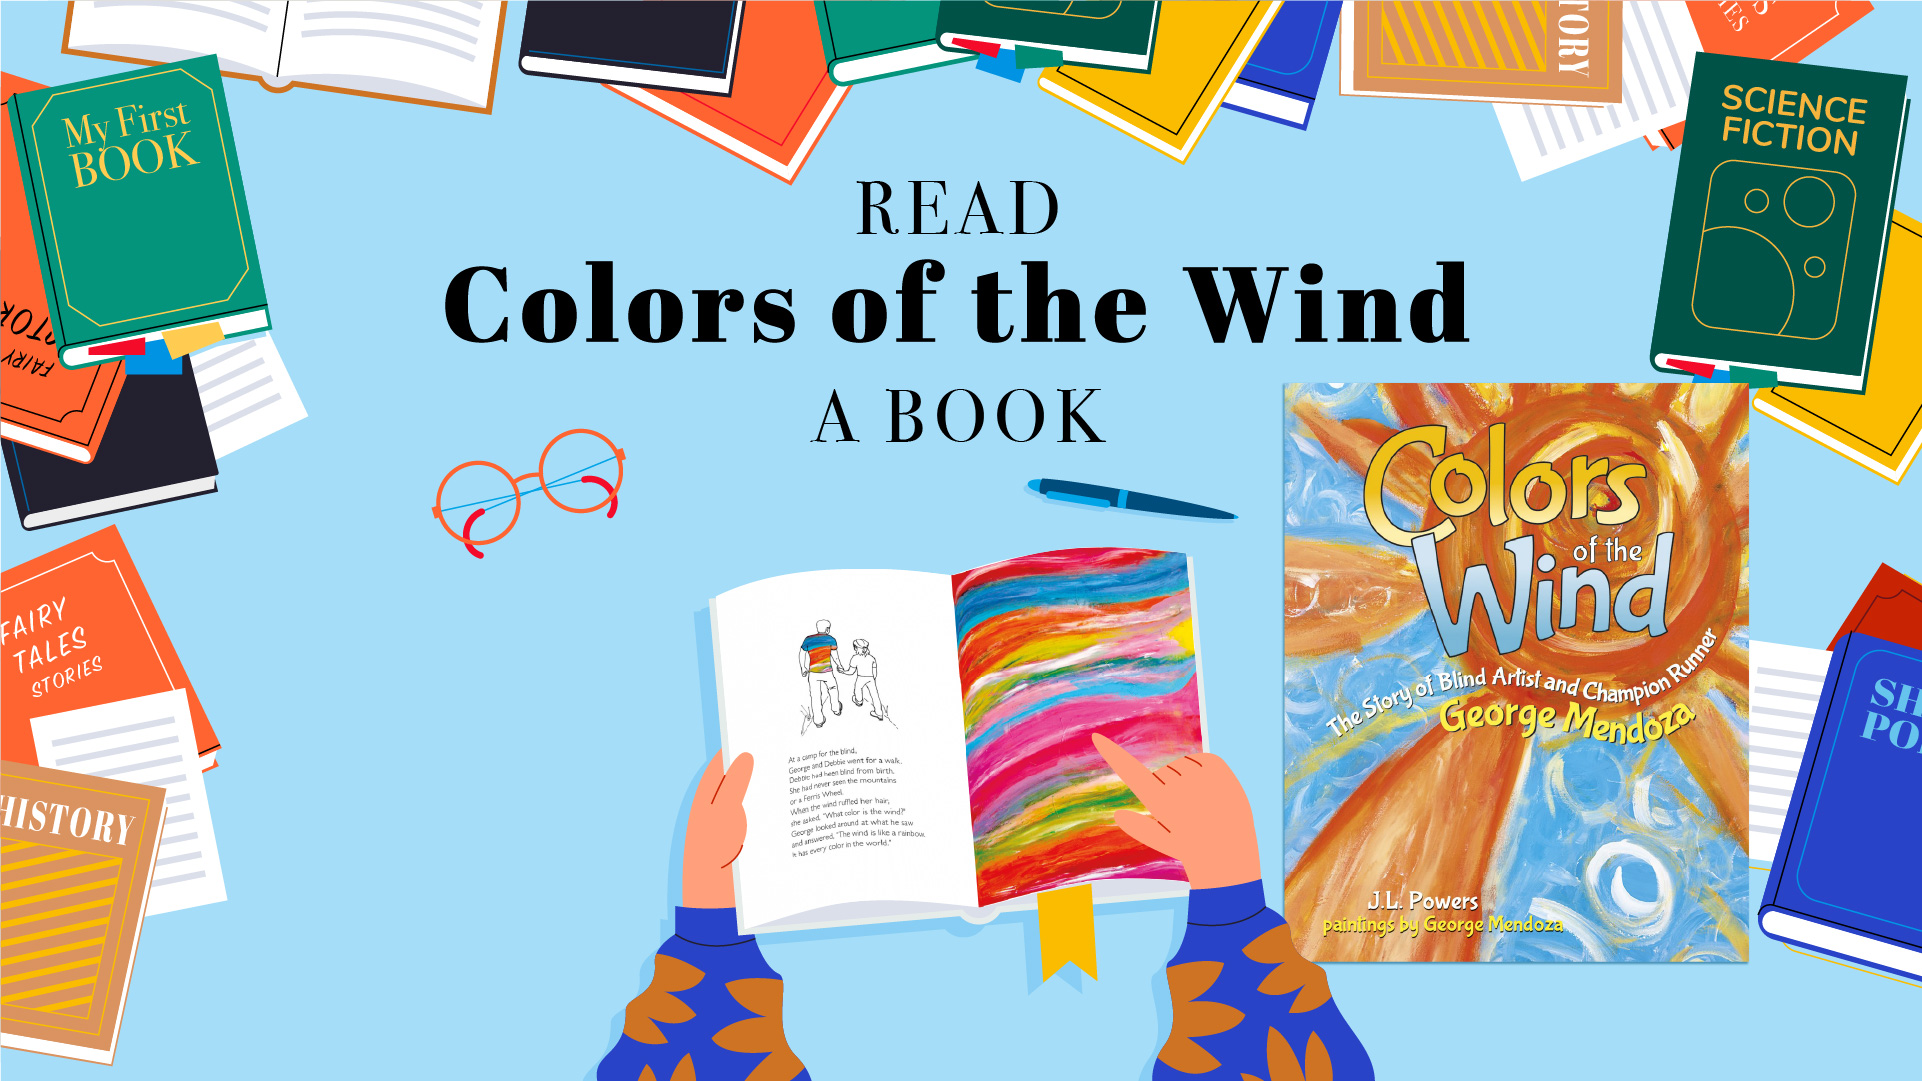 Books border, headline- first line: READ second line: "Colors of the Wind" third line: A BOOK graphics of orange glasses, blue pen, a person opening a book and point at the two spread pages from "Colors of the Wind". The cover of "Colors of the Wind" on right side.